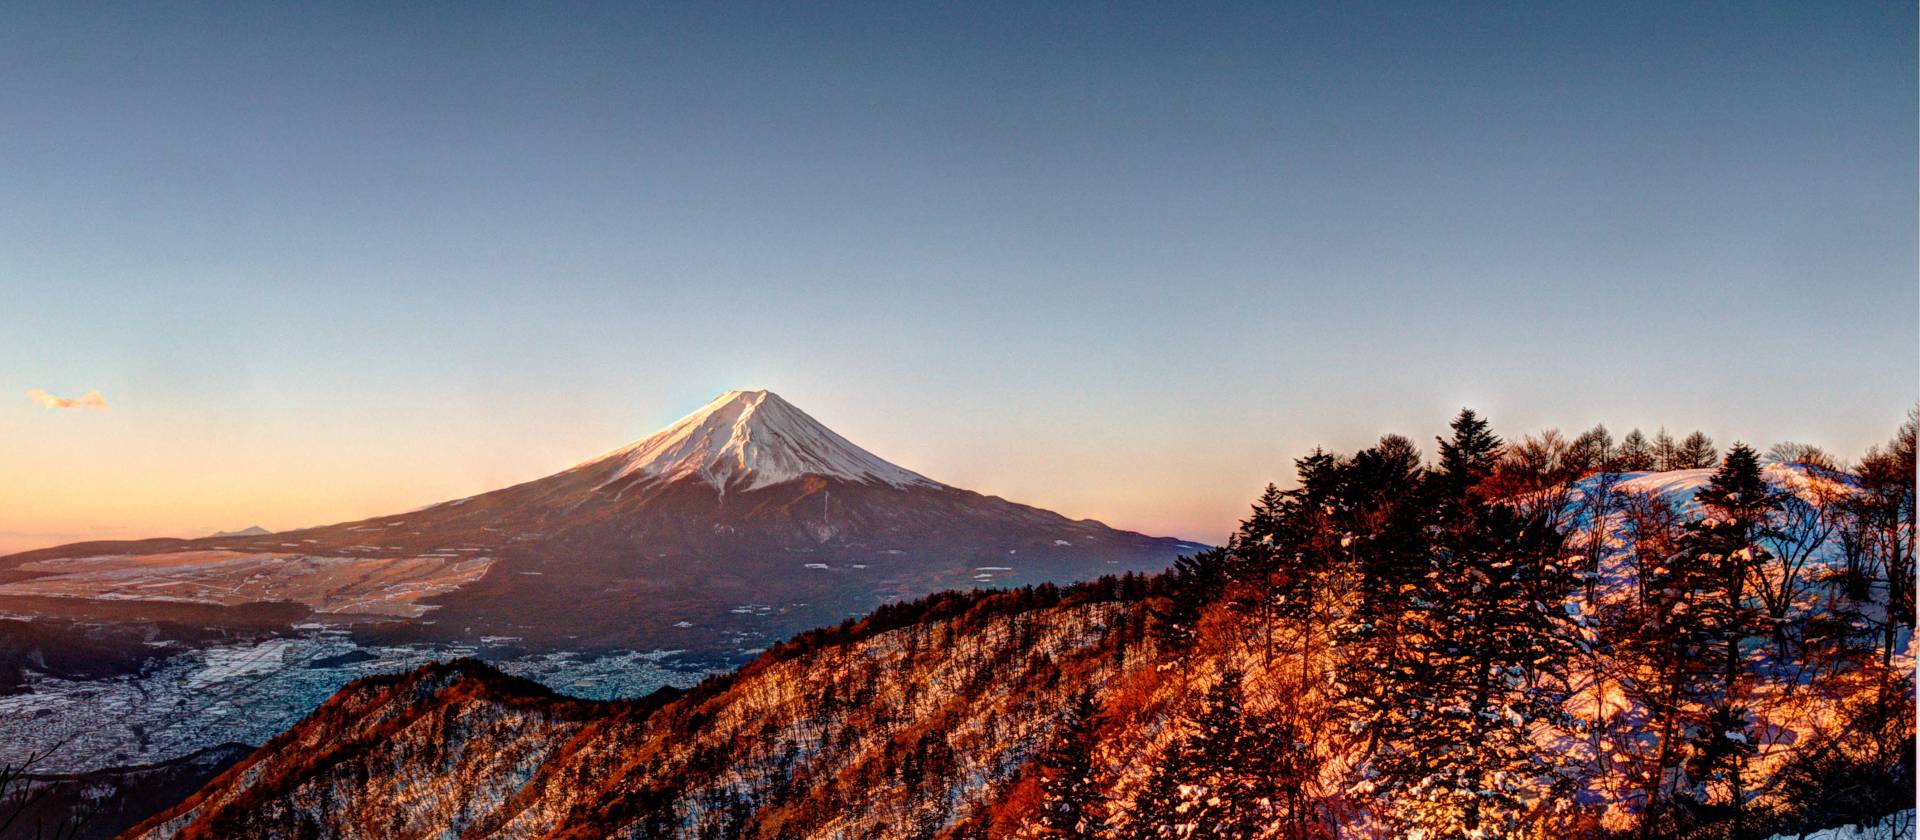 Views of Mount Fuji from the summit of Mount Mitsutoge, Japan | Colin Canfield